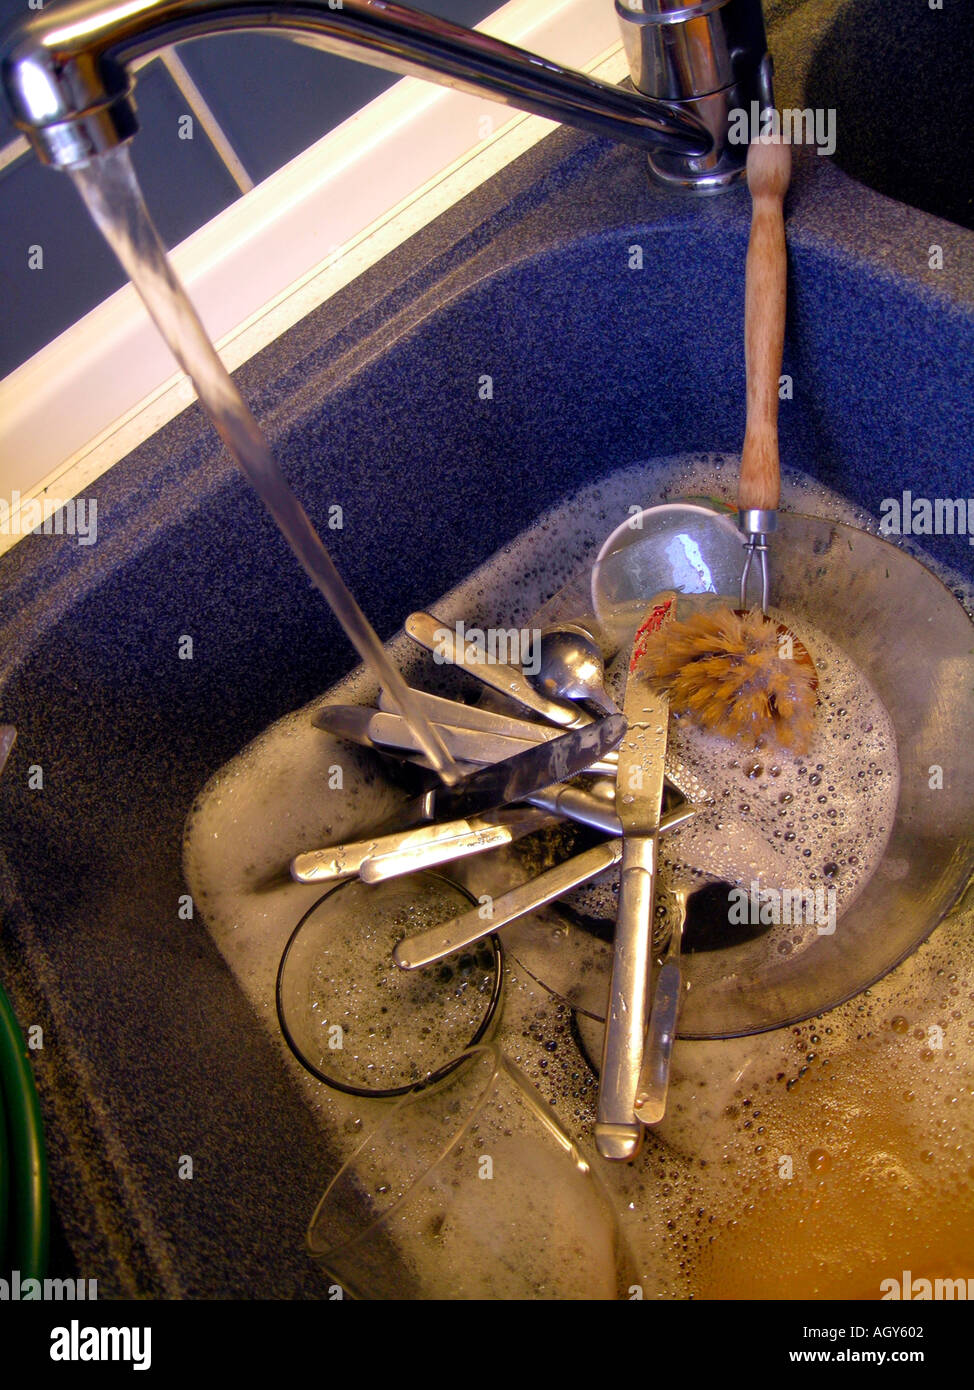 dirty crockery in water in a sink waiting for somebody to do the dishes Stock Photo